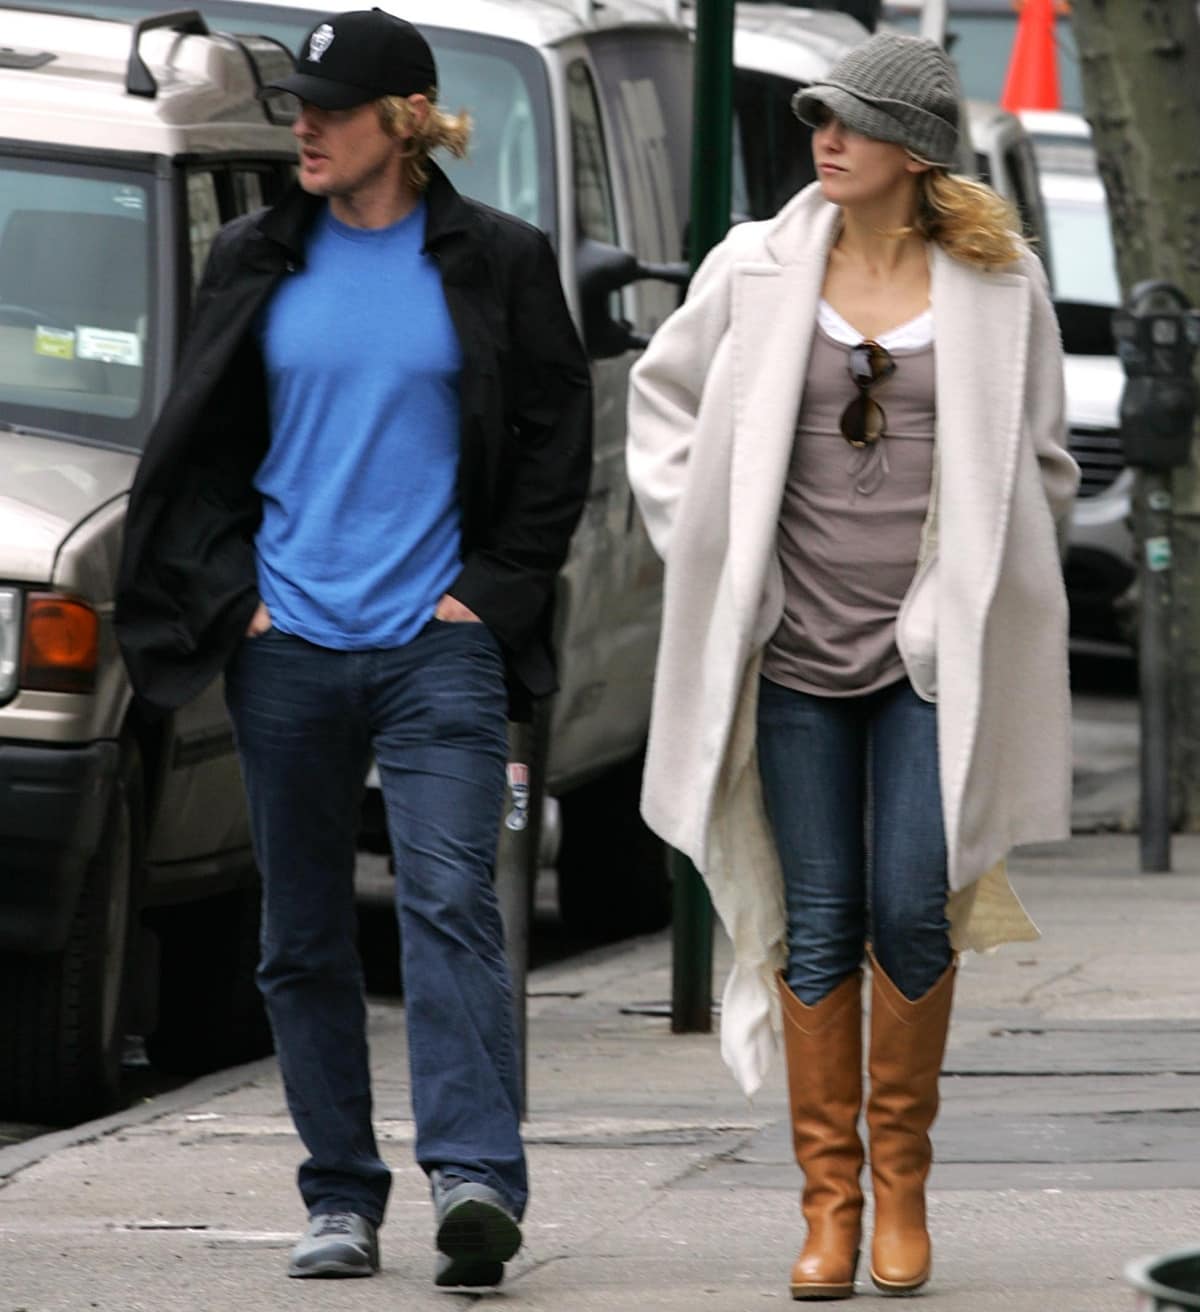 Owen Wilson and Kate Hudson out and about in New York City